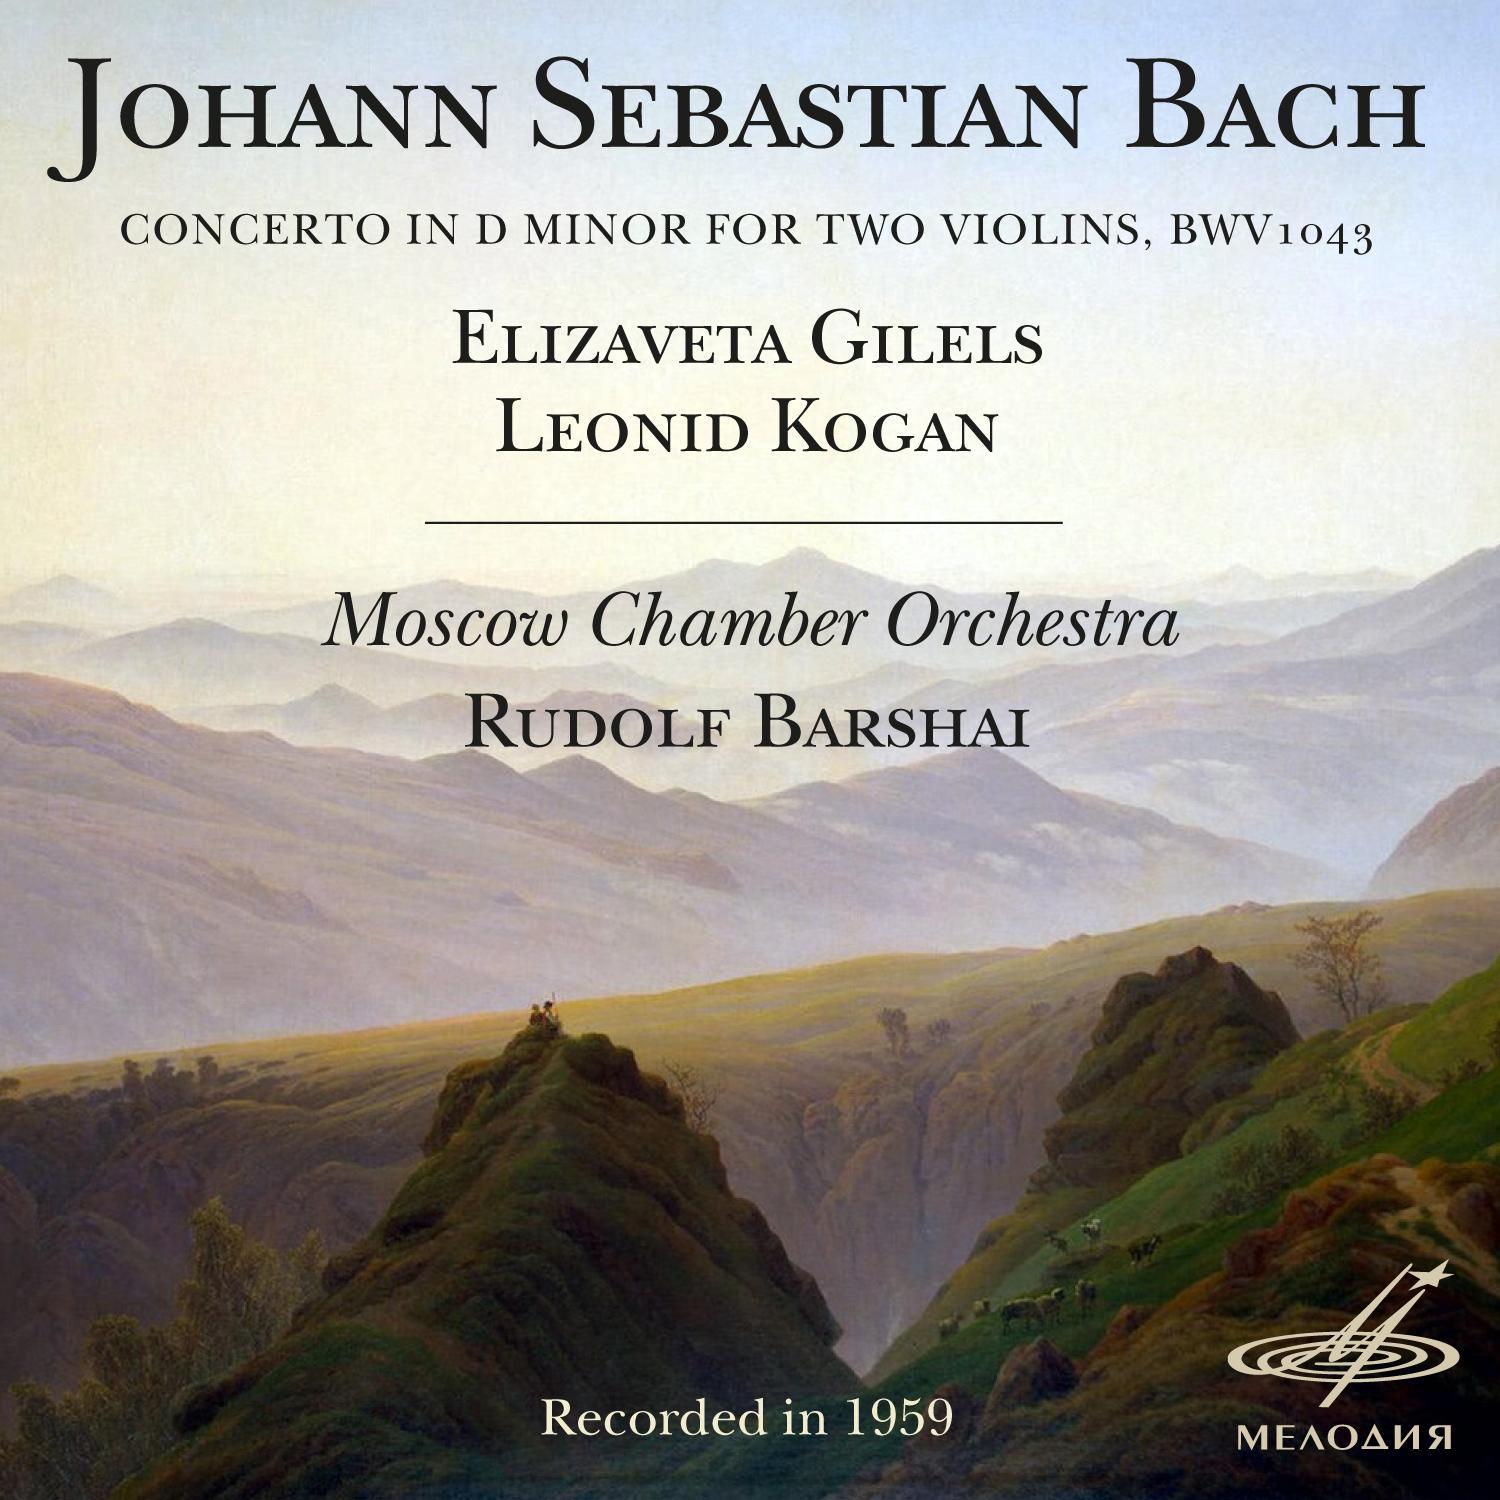 Bach: Concerto in D Minor for Two Violins, BWV 1043